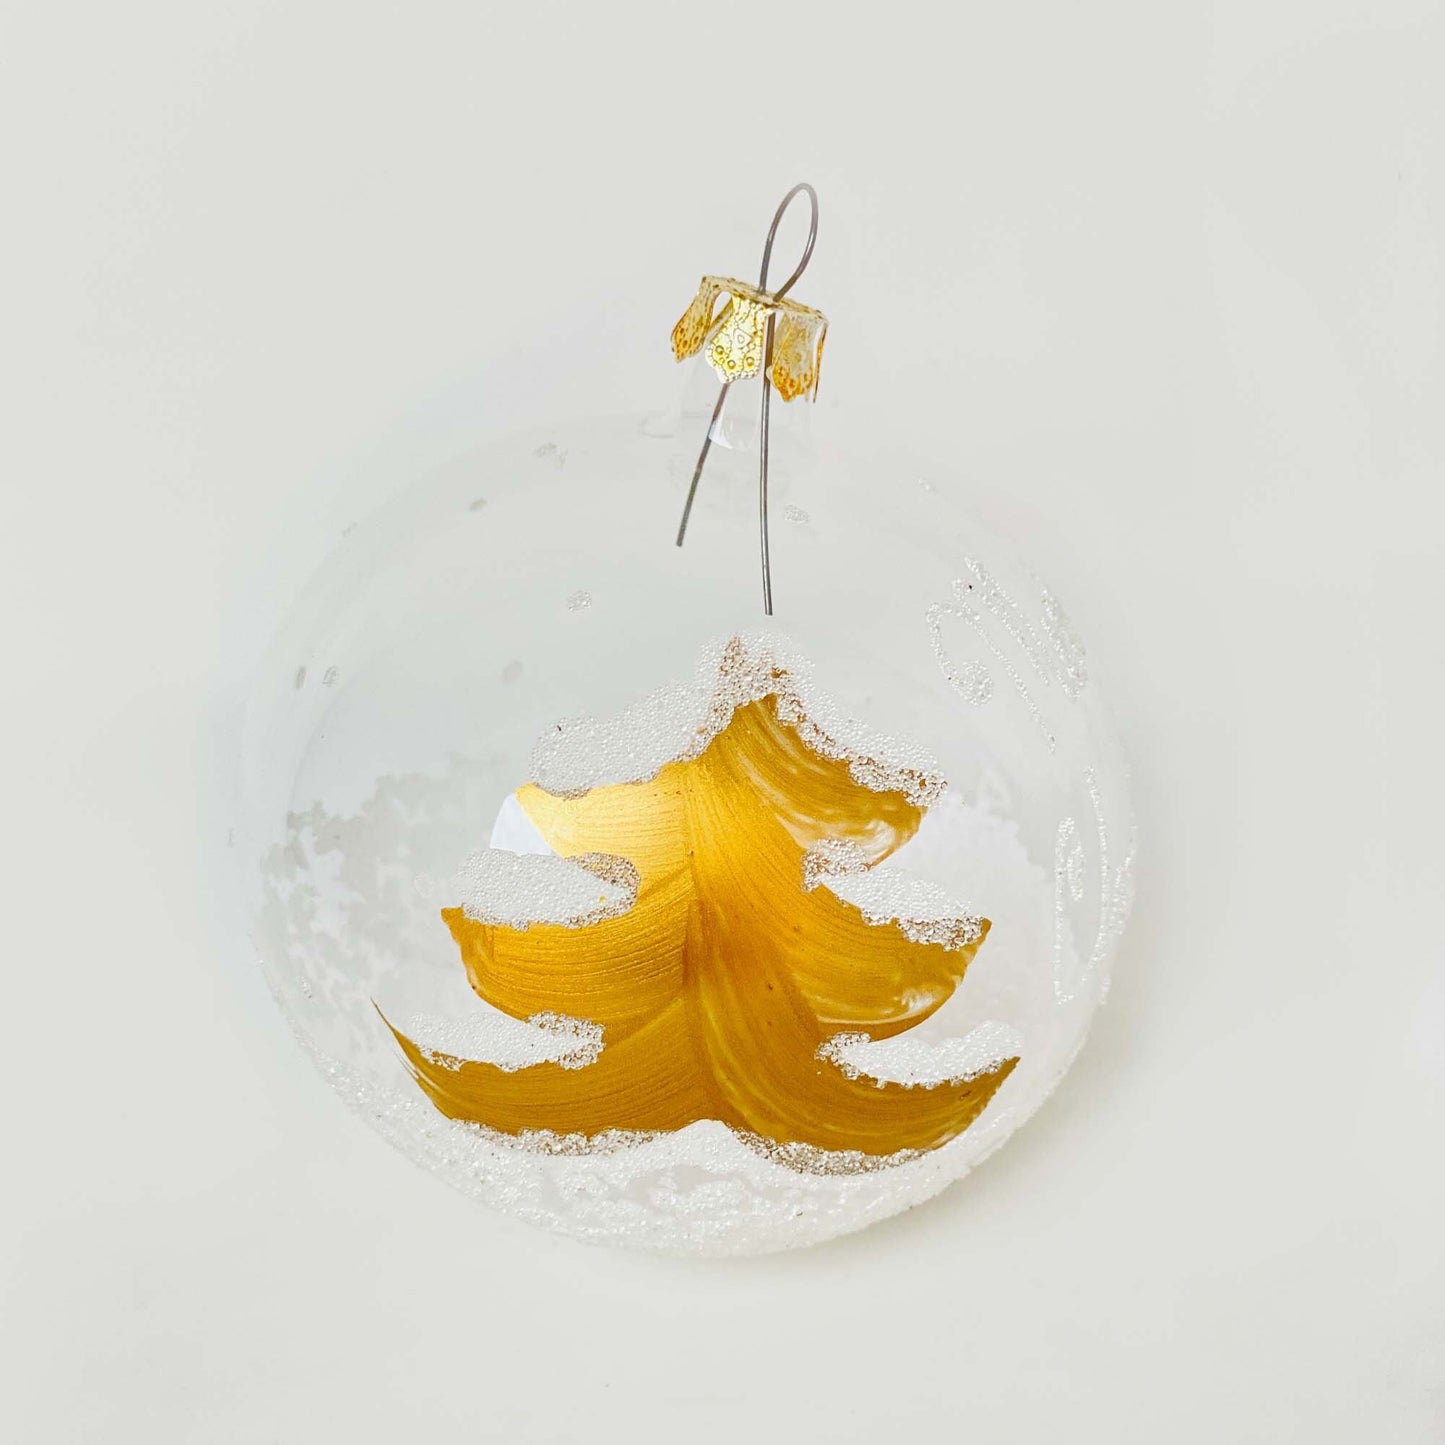 Blown Glass Christmas Sphere - White and gold ornament (Set of 6)